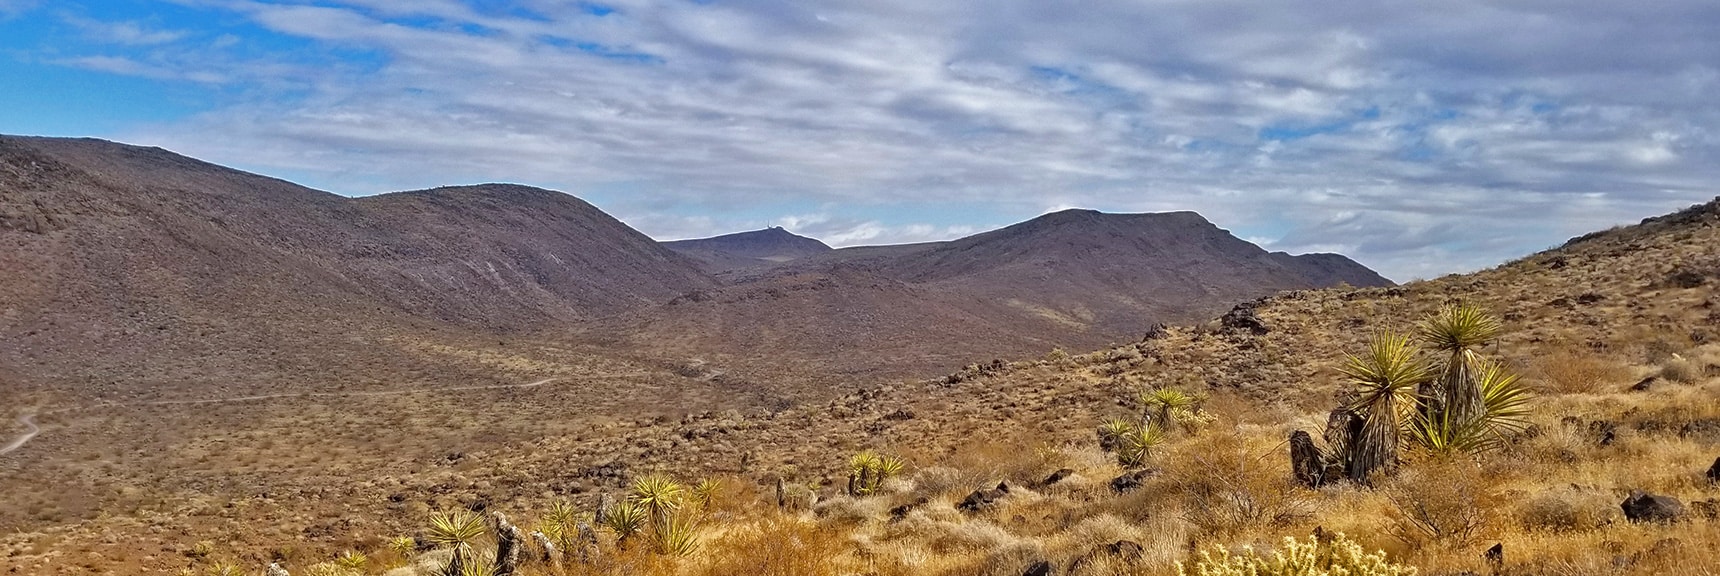 Looking Back Toward the Trailhead | McCullough Hills Trail in Sloan Canyon National Conservation Area, Nevada